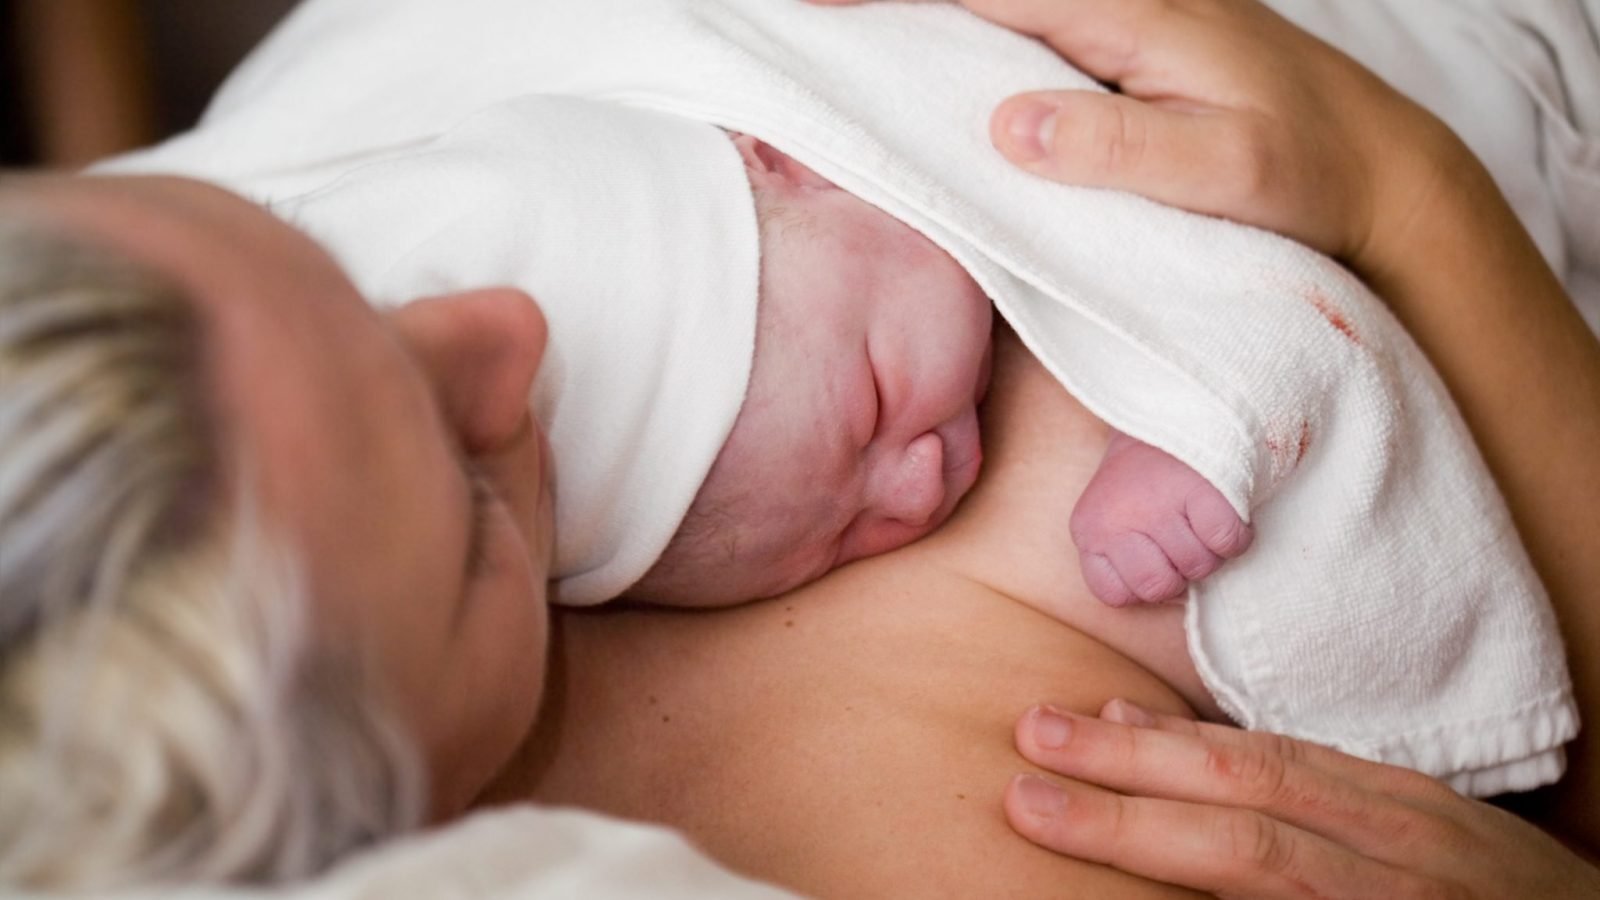 Benefits of a Natural Birth.  Why Drug-Free Delivery?